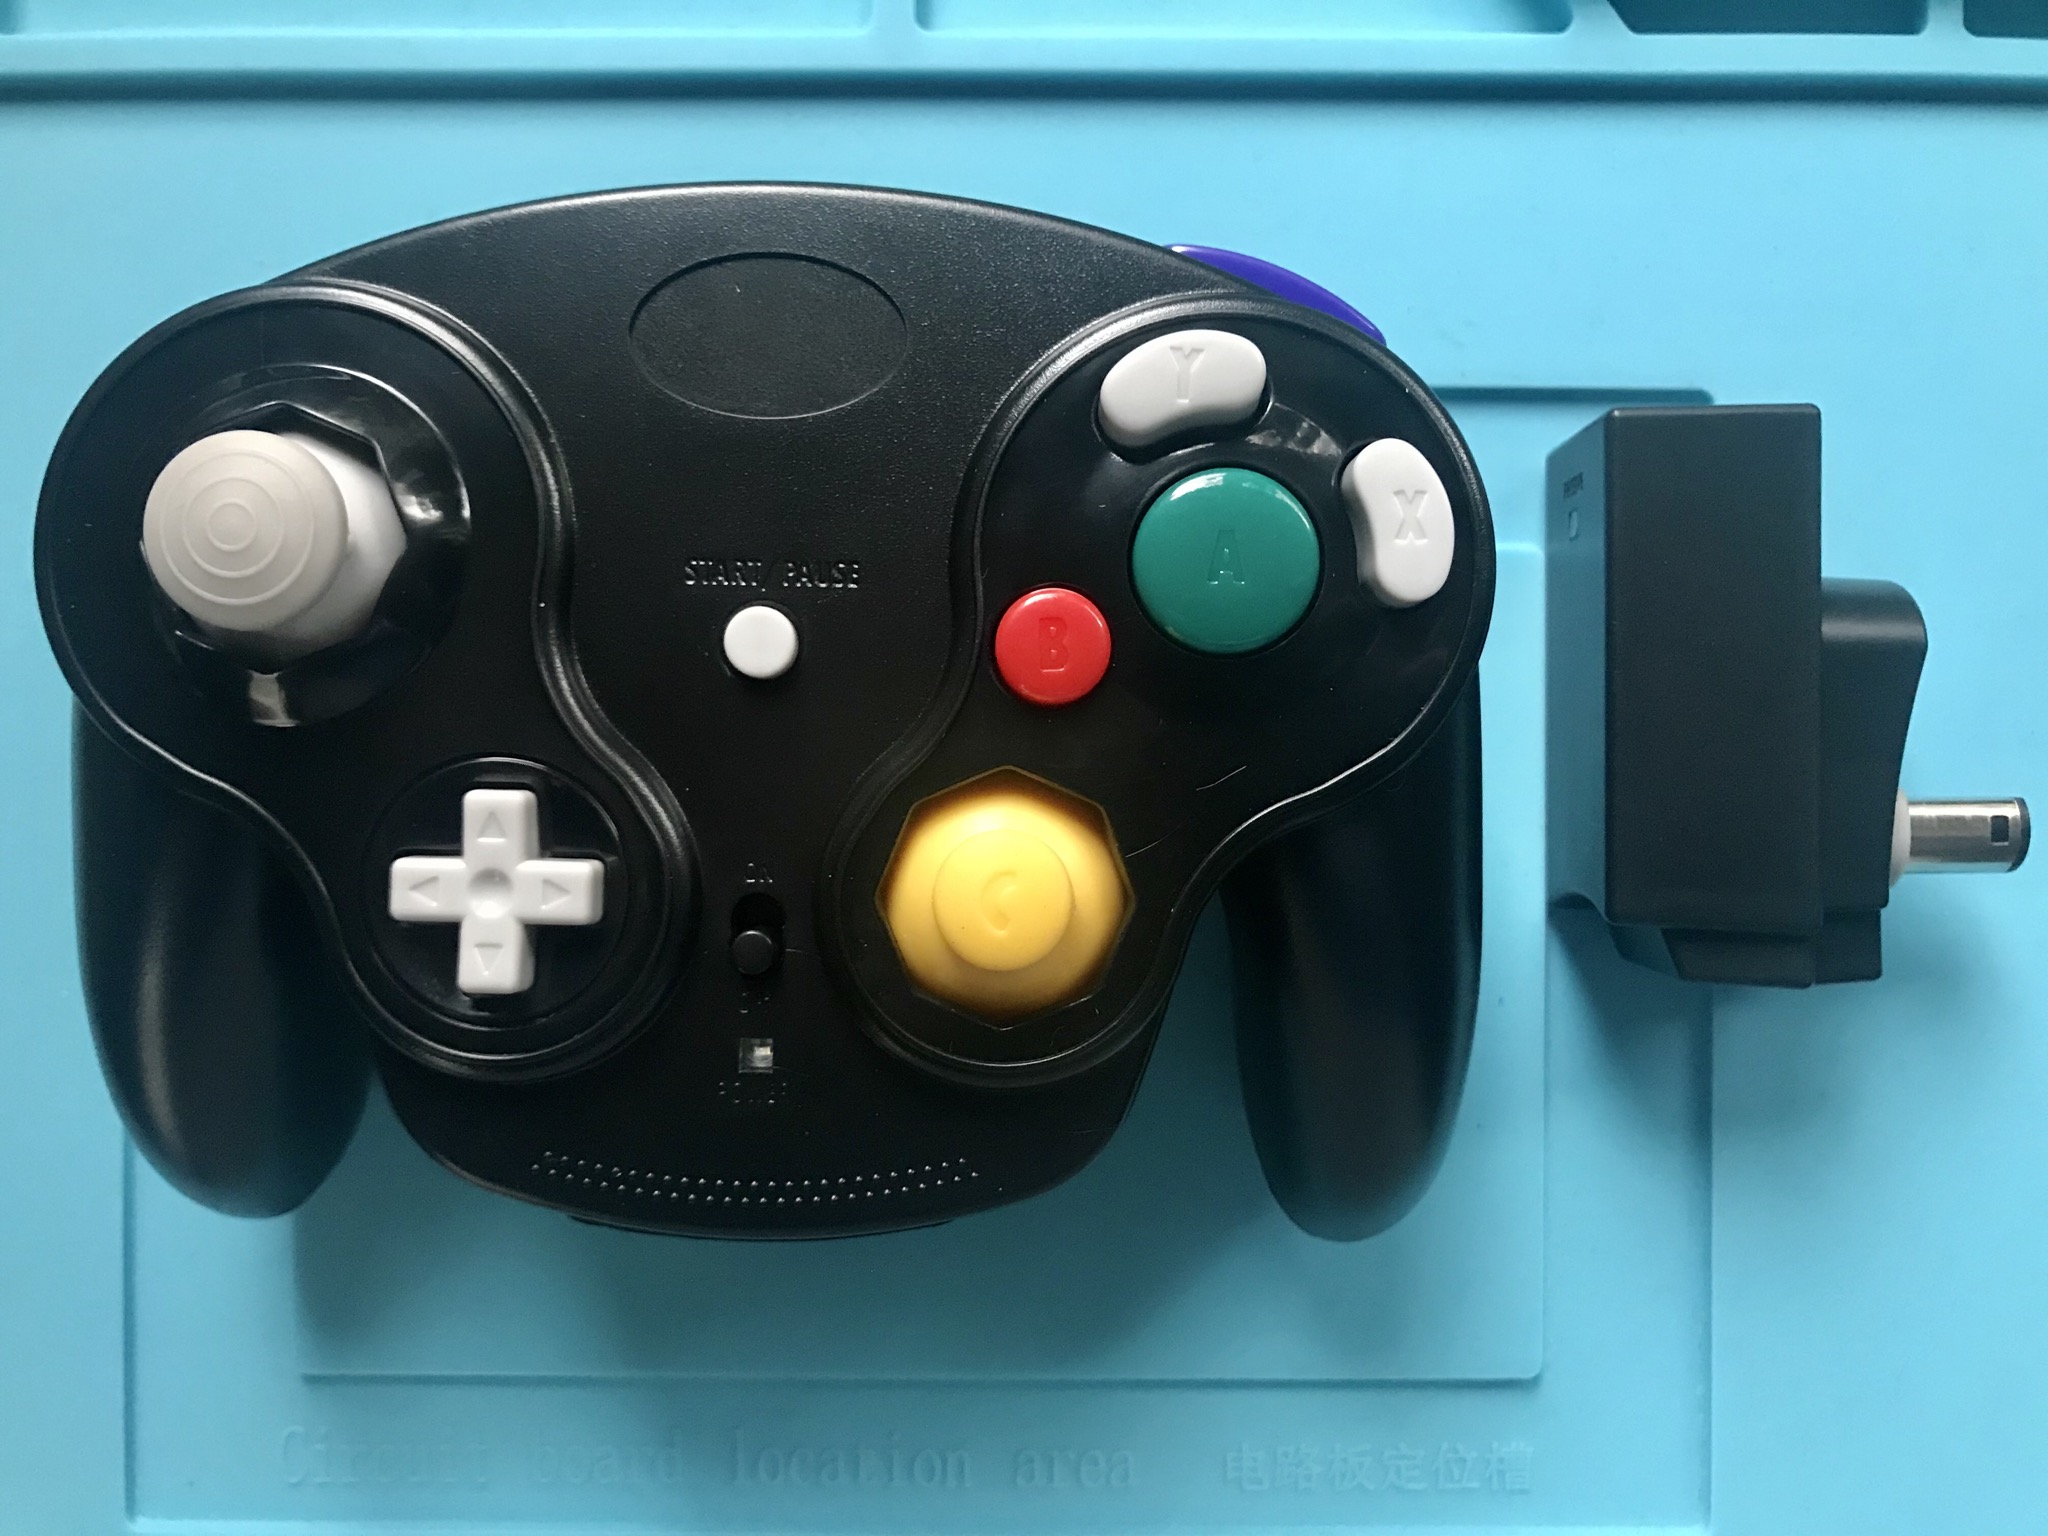 Aftermarket copy of the GameCube WaveBird wireless controller and receiver